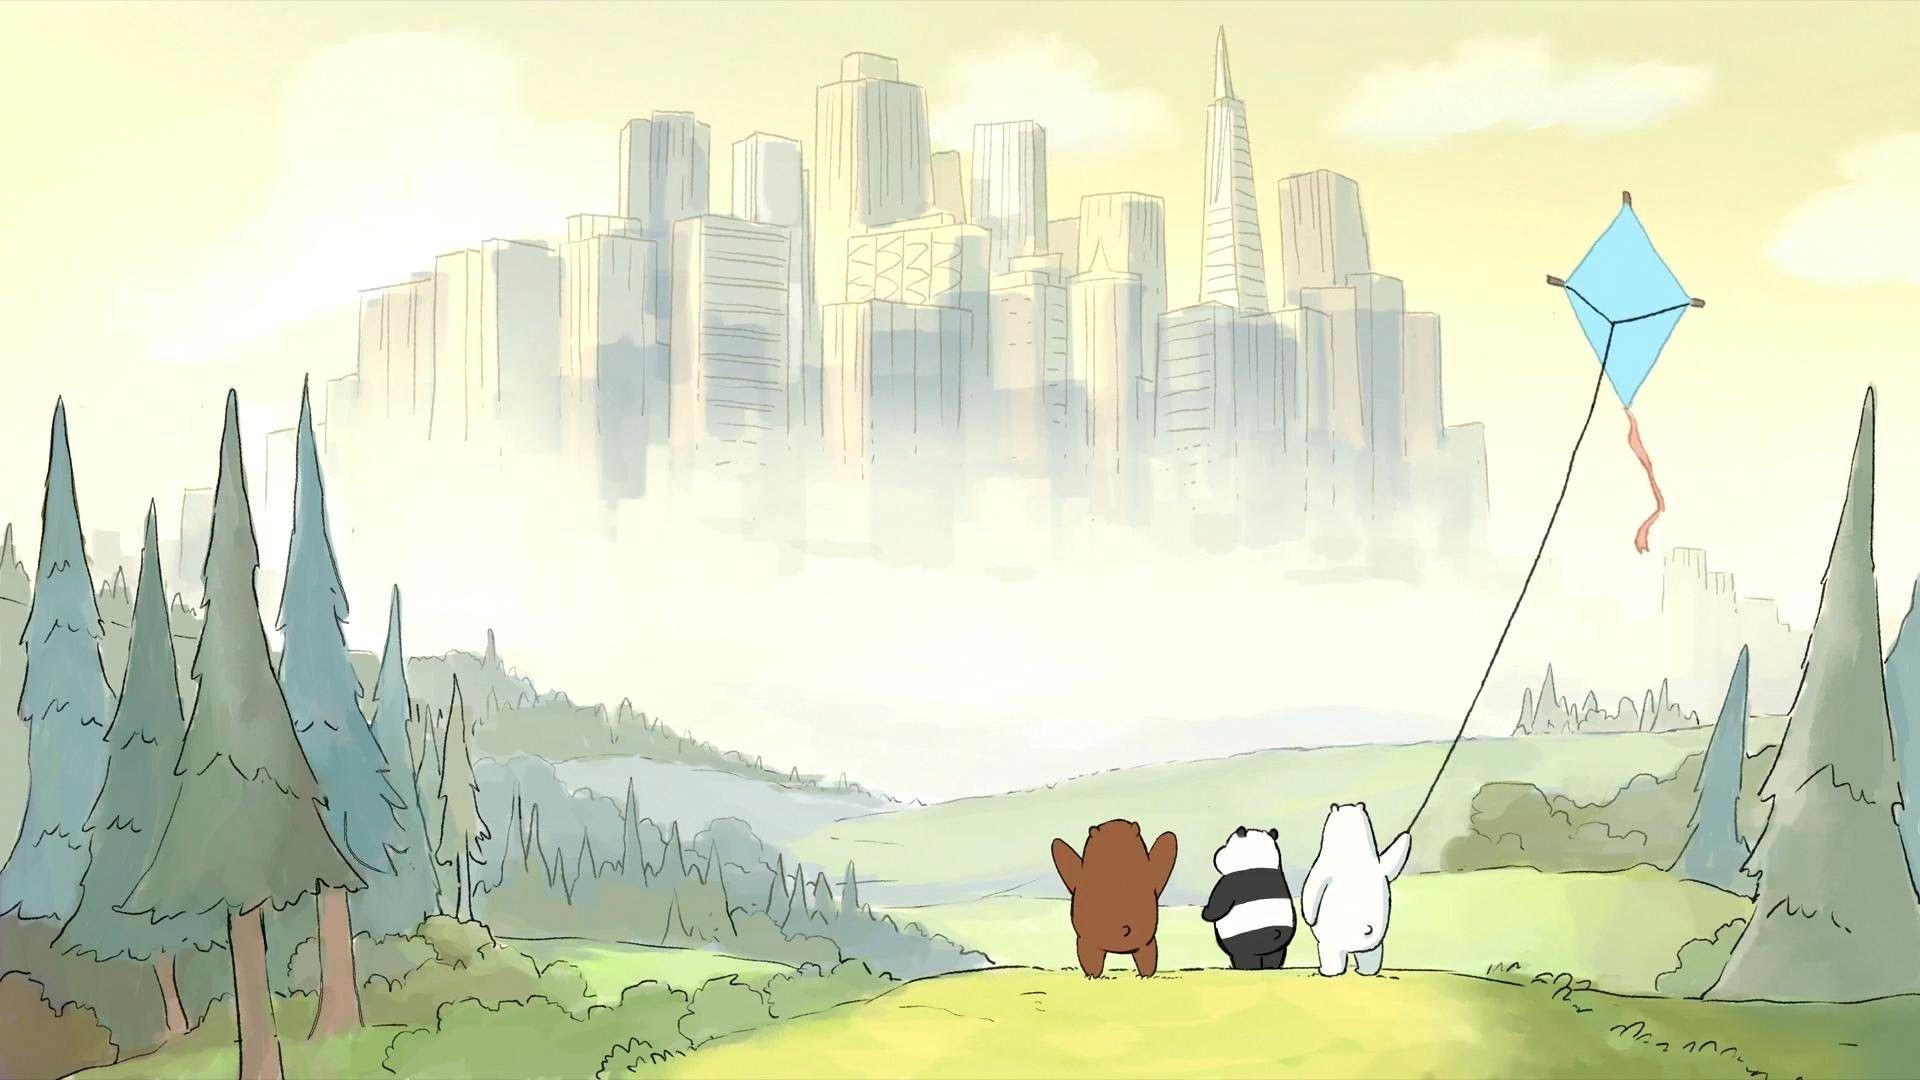 We Bare Bears Wallpaper 1920x1080 for iphone 5. We